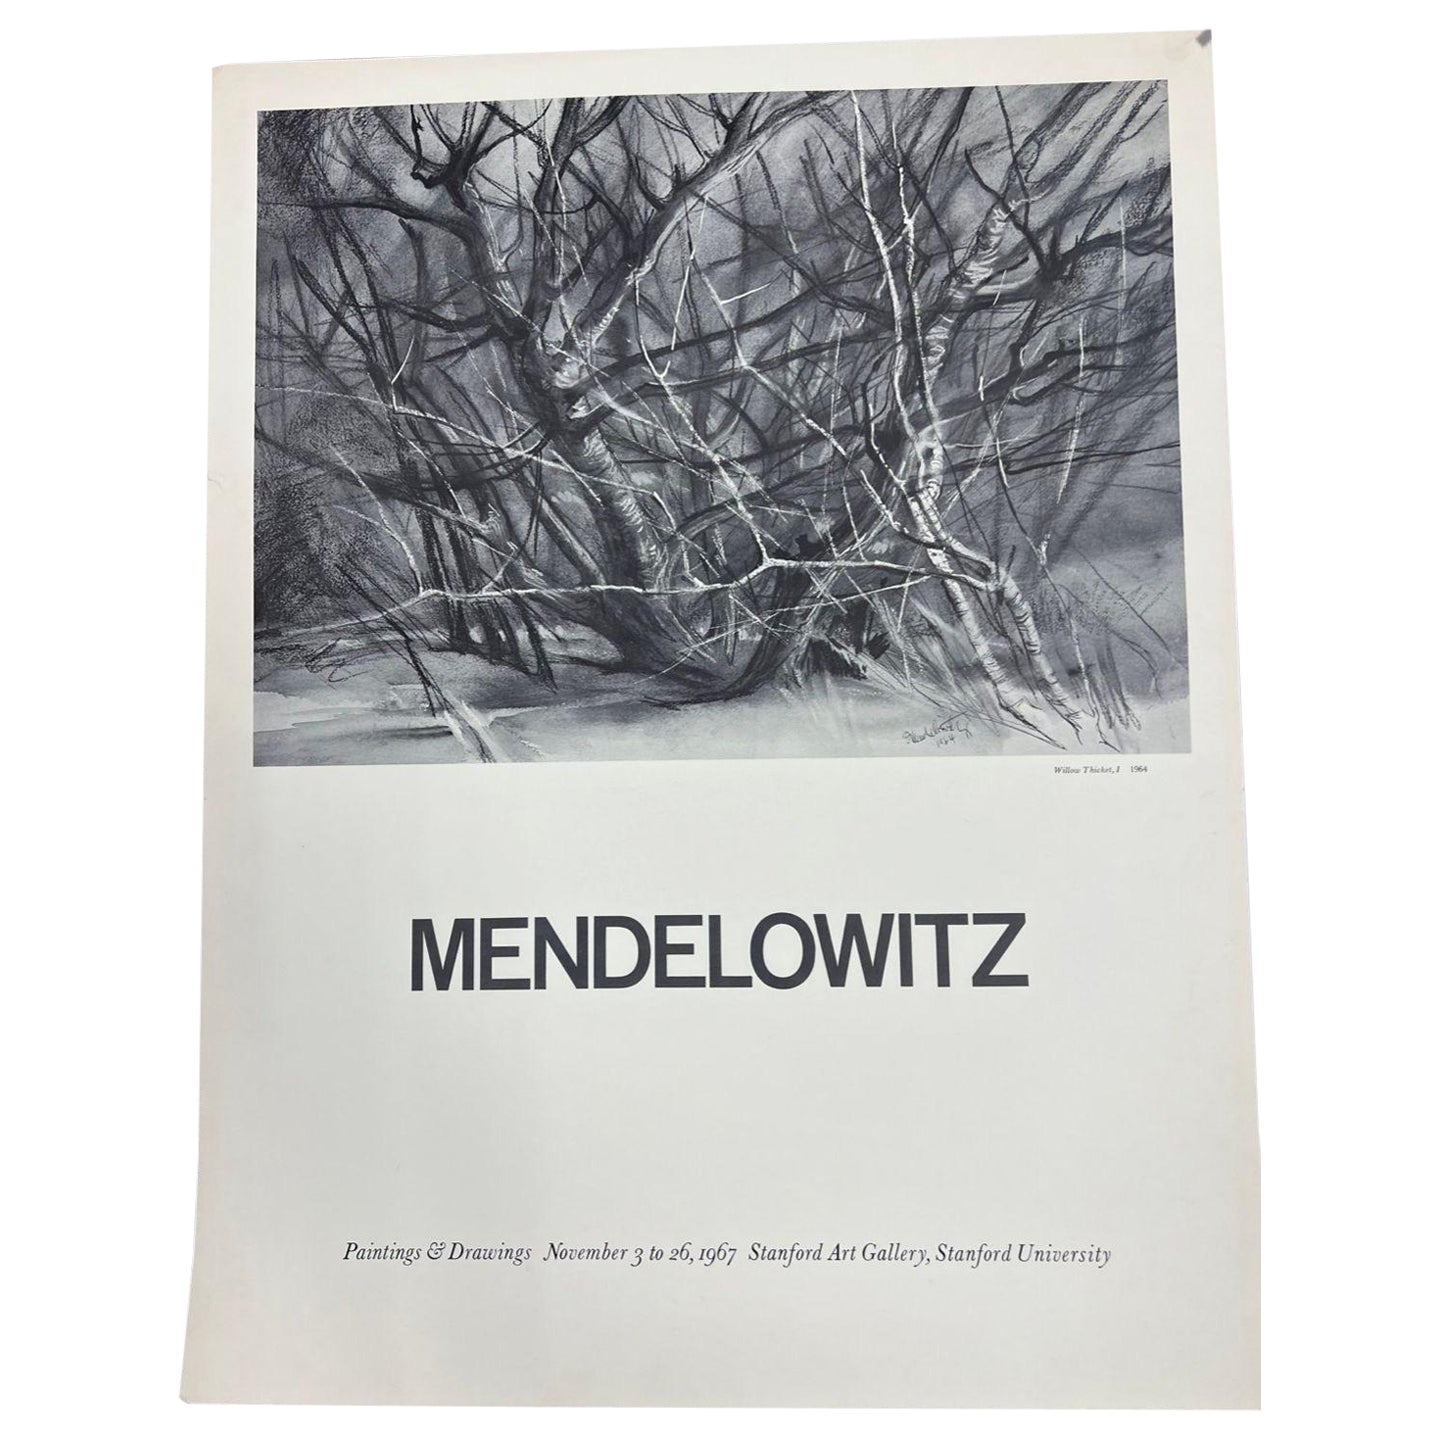 Vintage 1967 Poster of Mendelowitz Exhibition at Stanford University. For Sale